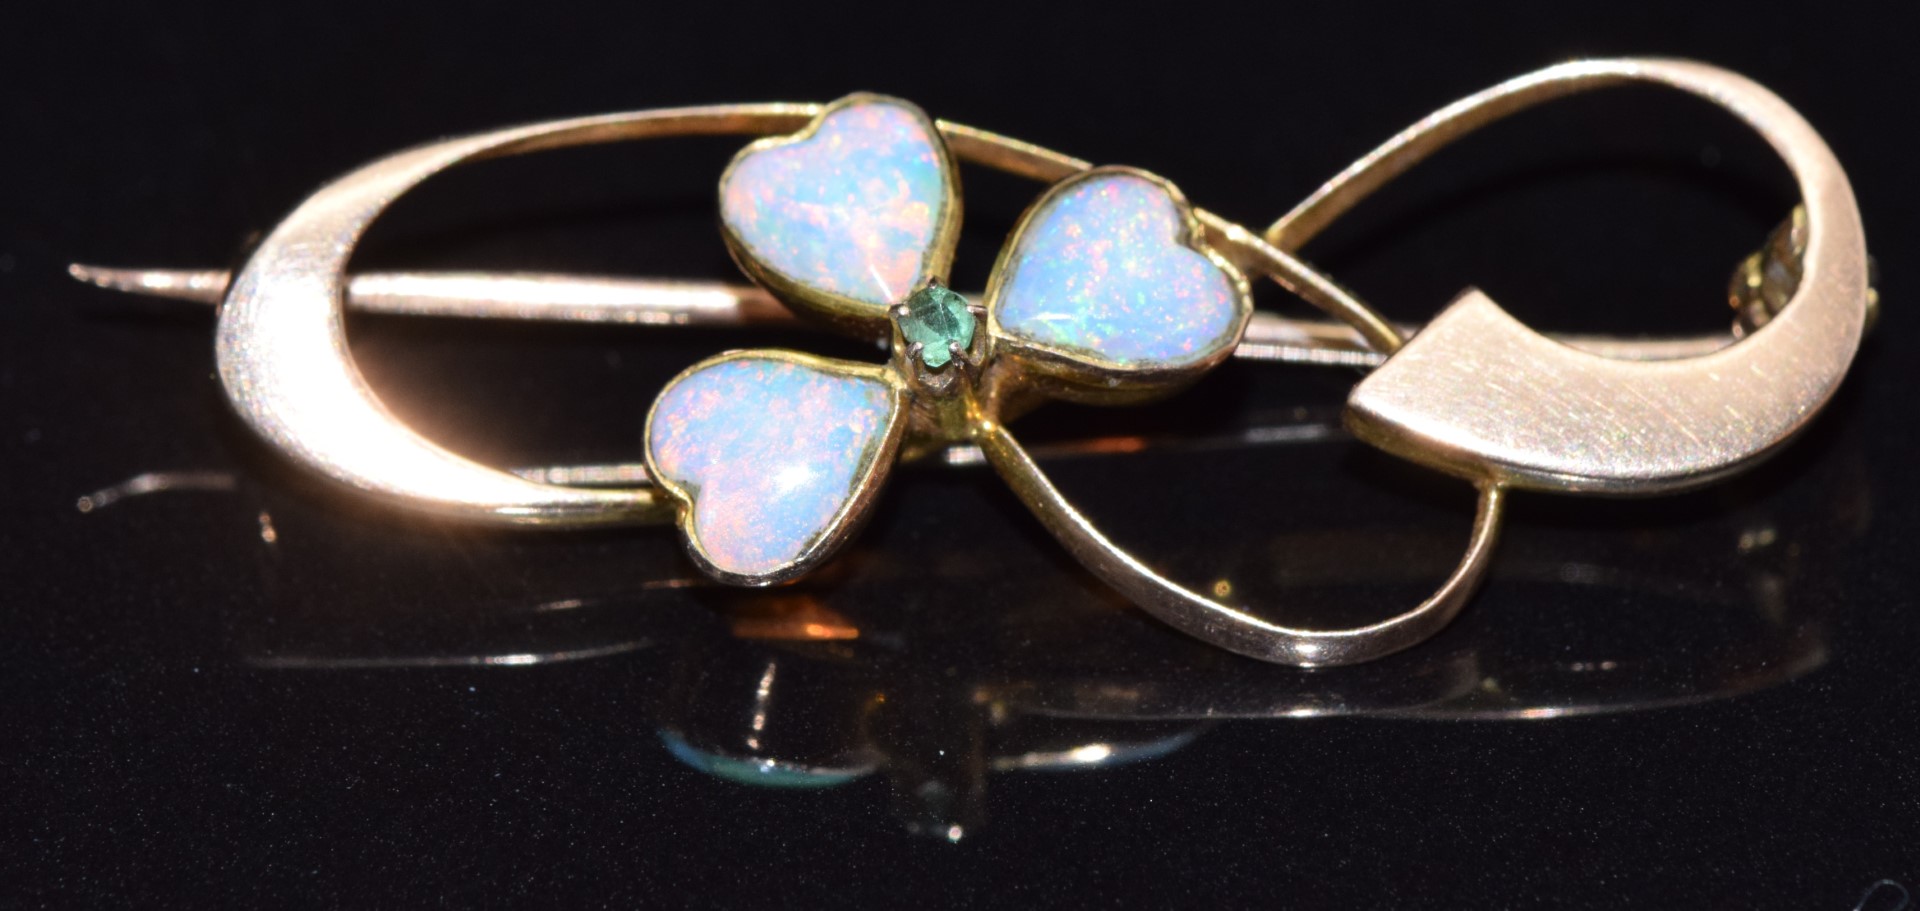 Edwardian 9ct gold brooch set with heart shaped opals and a demantoid garnet forming a clover/